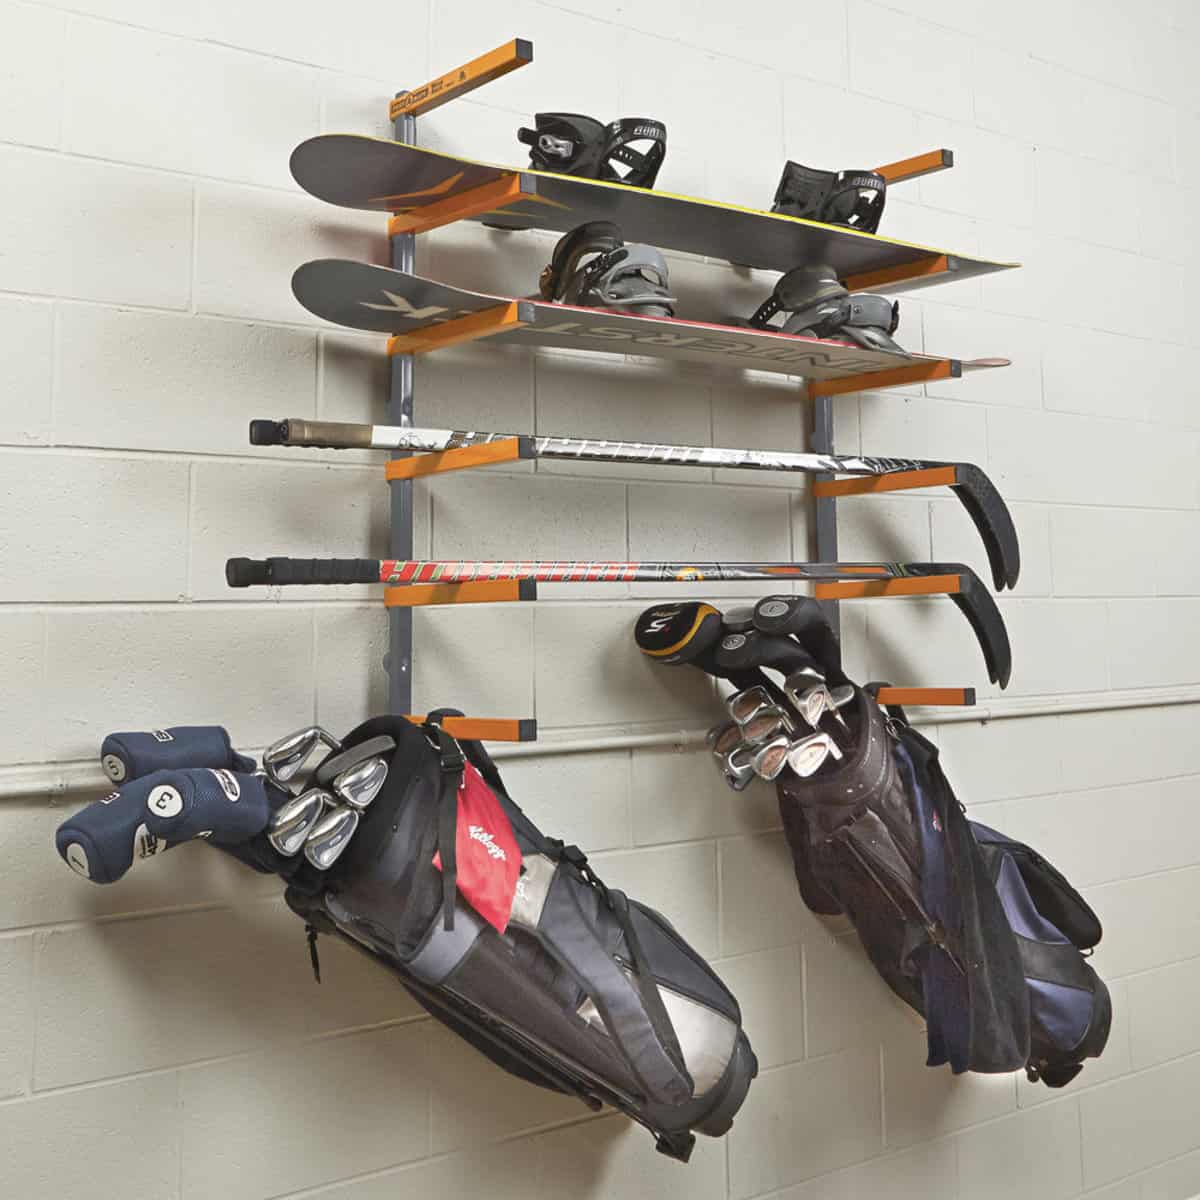 Sports equipment organizer rack on a concrete wall for golf and hockey supplies.